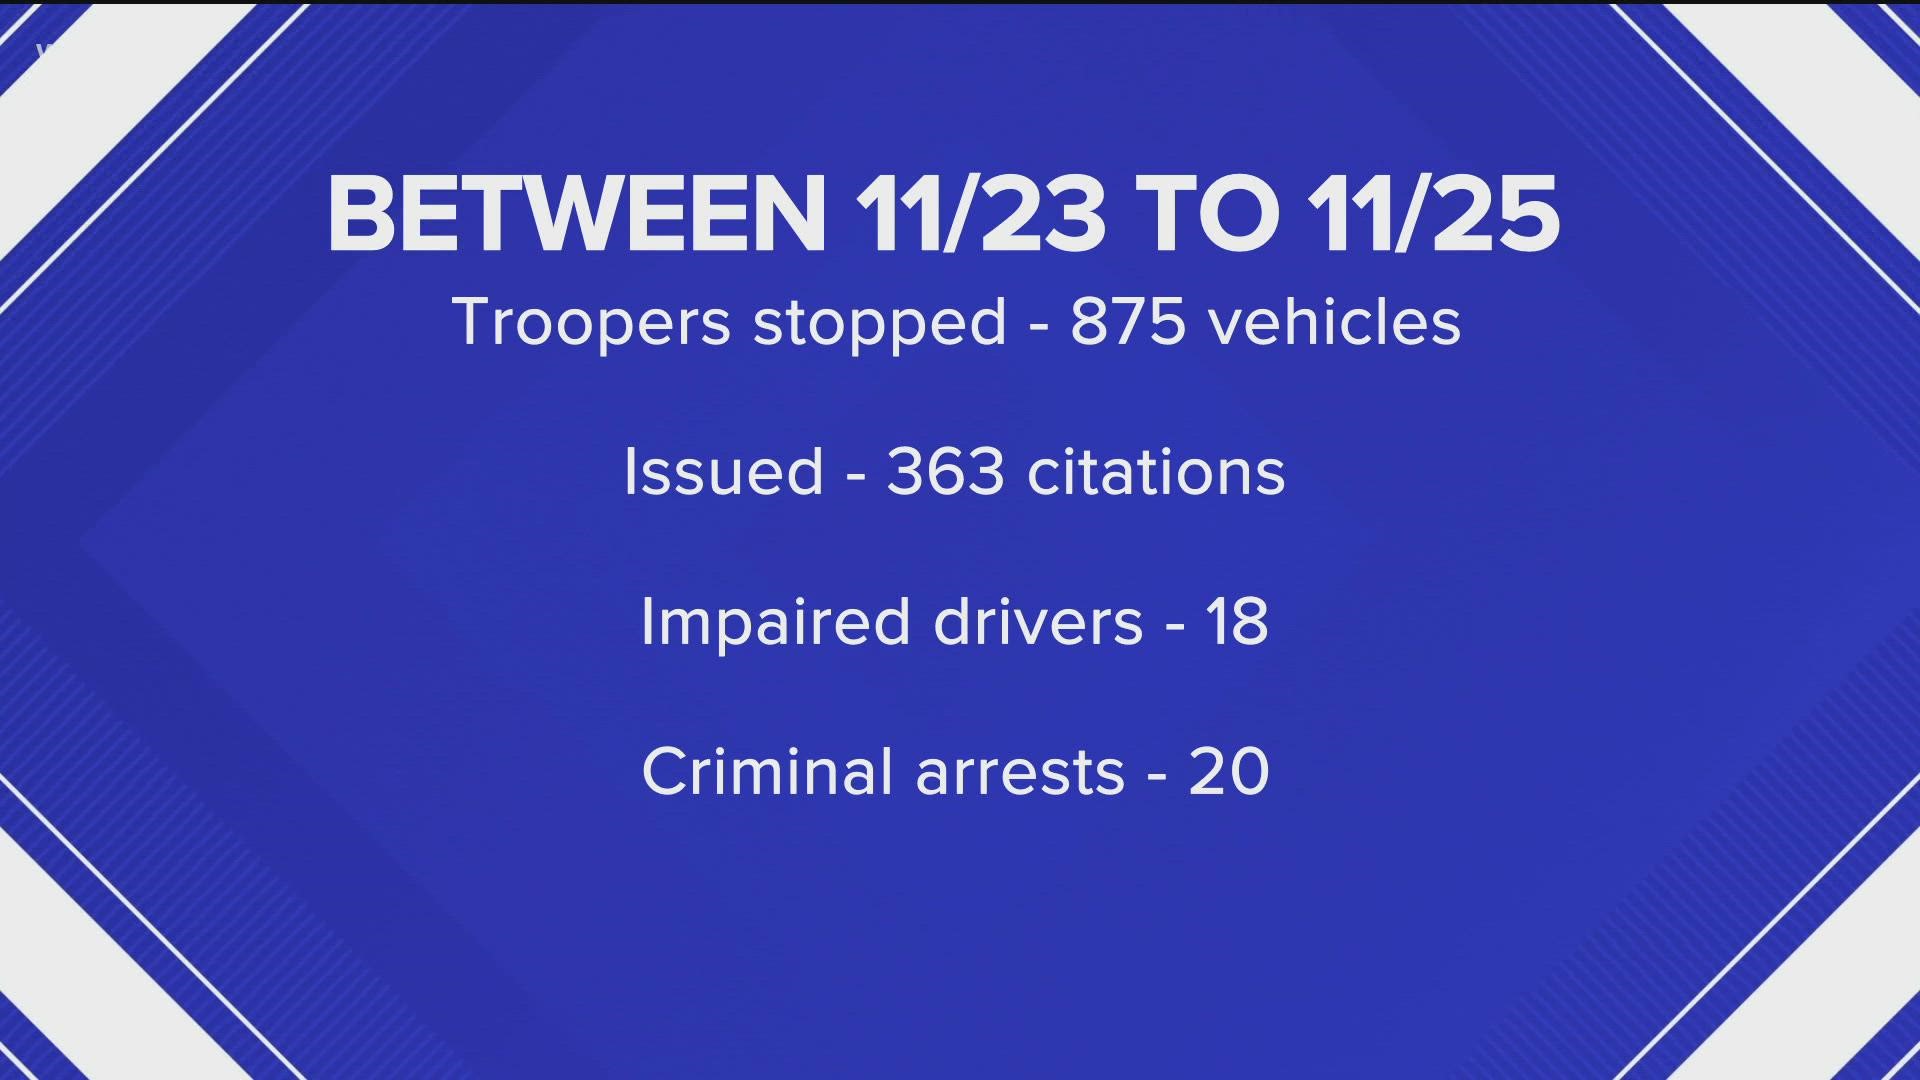 The traffic enforcement operation lasted from the morning of November 23 to the morning of November 25, the start of the holiday driving season.